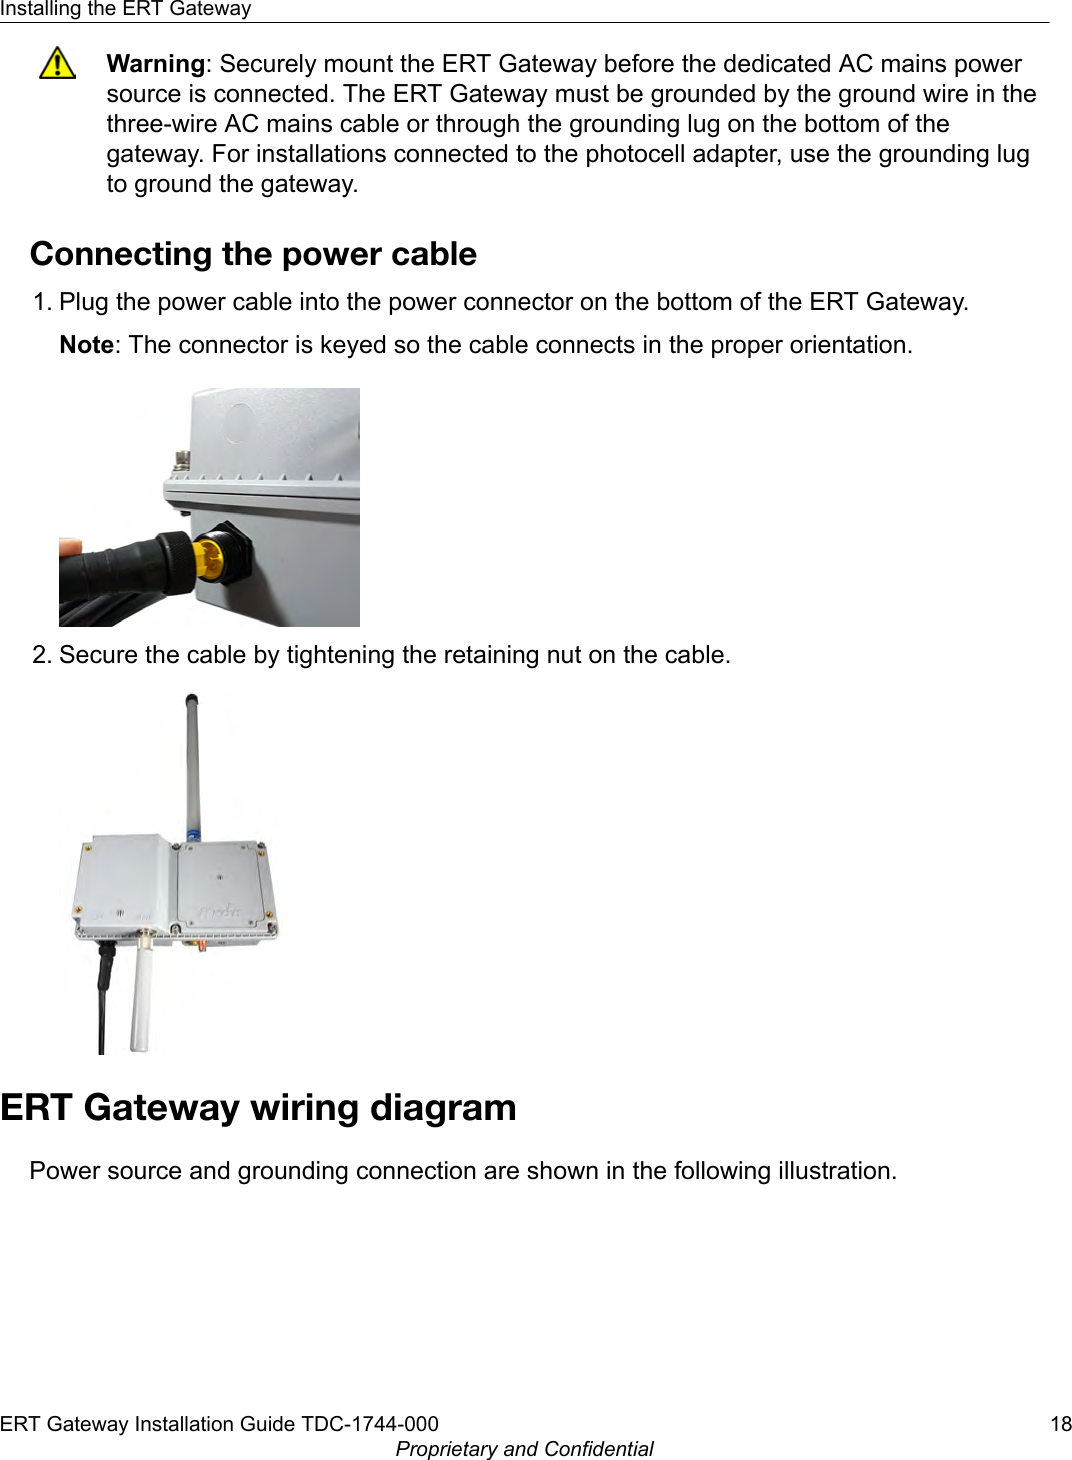 Warning: Securely mount the ERT Gateway before the dedicated AC mains powersource is connected. The ERT Gateway must be grounded by the ground wire in thethree-wire AC mains cable or through the grounding lug on the bottom of thegateway. For installations connected to the photocell adapter, use the grounding lugto ground the gateway.Connecting the power cable1. Plug the power cable into the power connector on the bottom of the ERT Gateway.Note: The connector is keyed so the cable connects in the proper orientation.2. Secure the cable by tightening the retaining nut on the cable.ERT Gateway wiring diagramPower source and grounding connection are shown in the following illustration.Installing the ERT GatewayERT Gateway Installation Guide TDC-1744-000 18Proprietary and Confidential